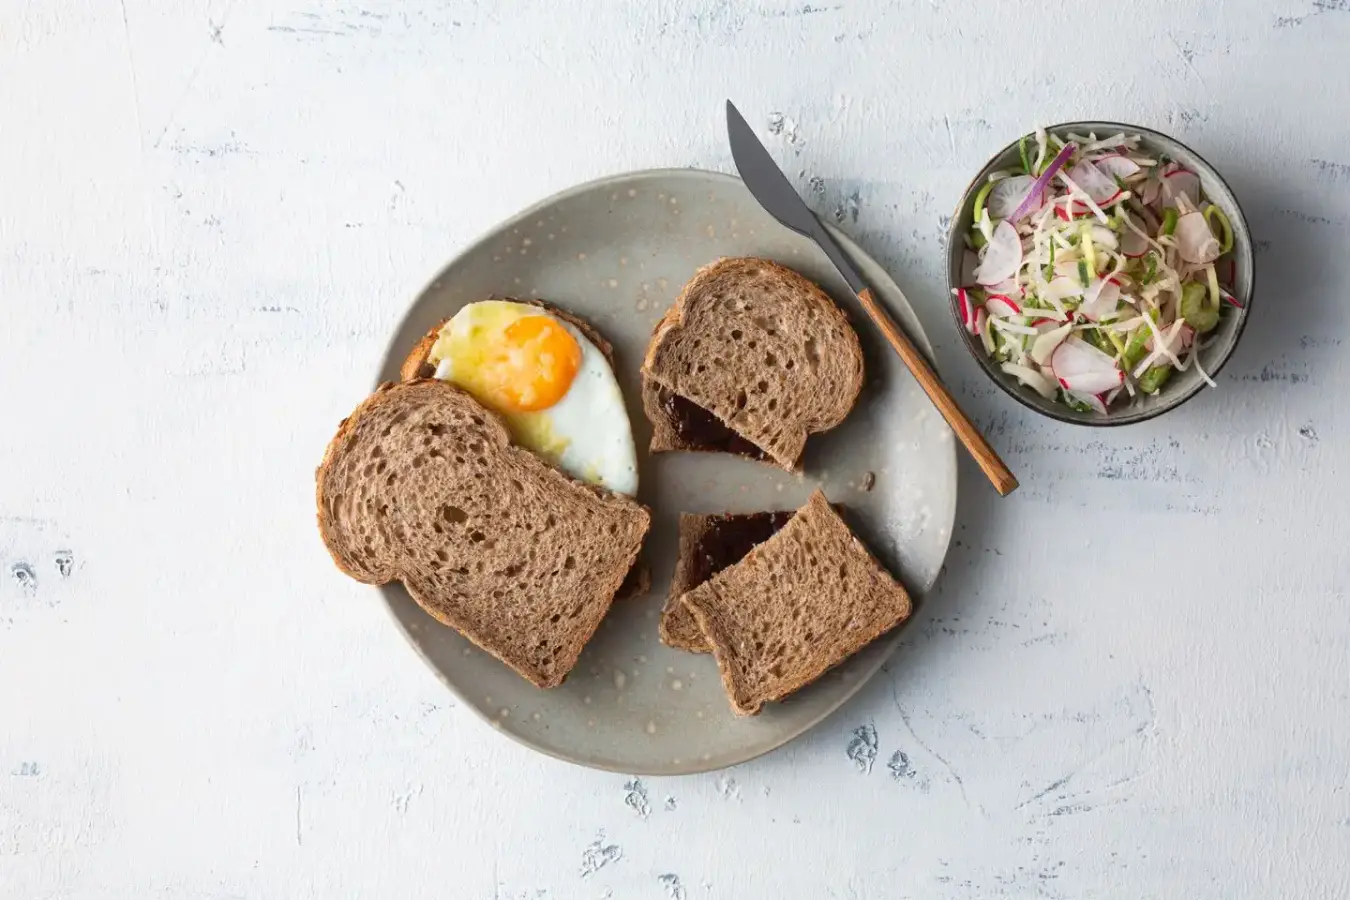 Whole wheat bread with fried eggs and whole wheat bread with apple syrup plus salad